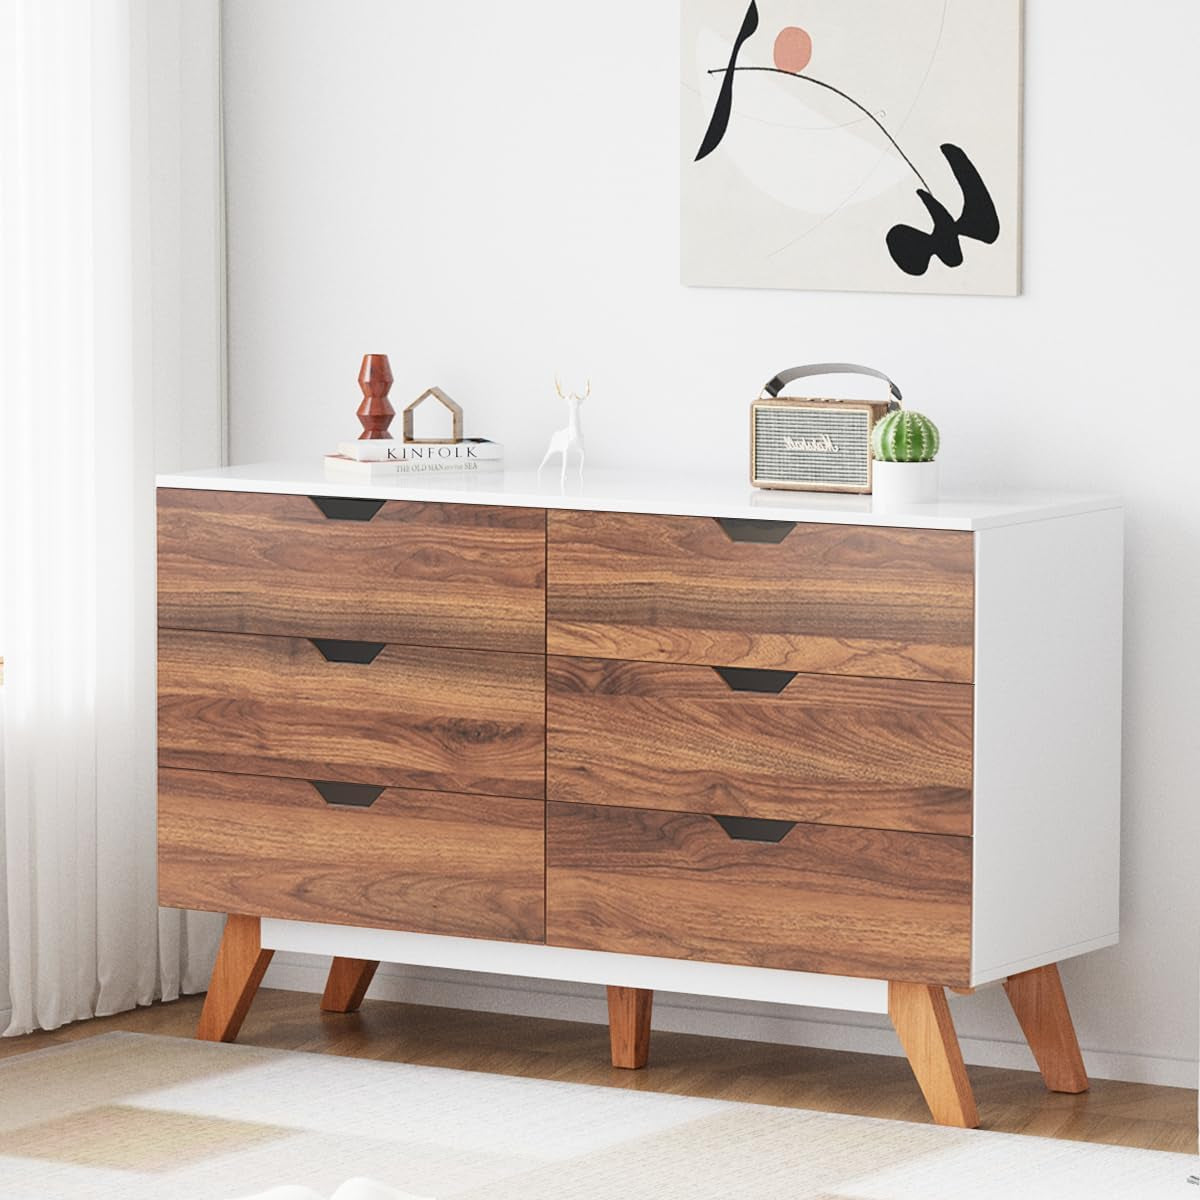 Wood Dresser with 6 Deep Drawers, Modern 6 Chest of Drawers Wood Double Dressers, Wooden Storage Cabinet for Bedroom, Living Room, Hallway, Entryway - Walnut